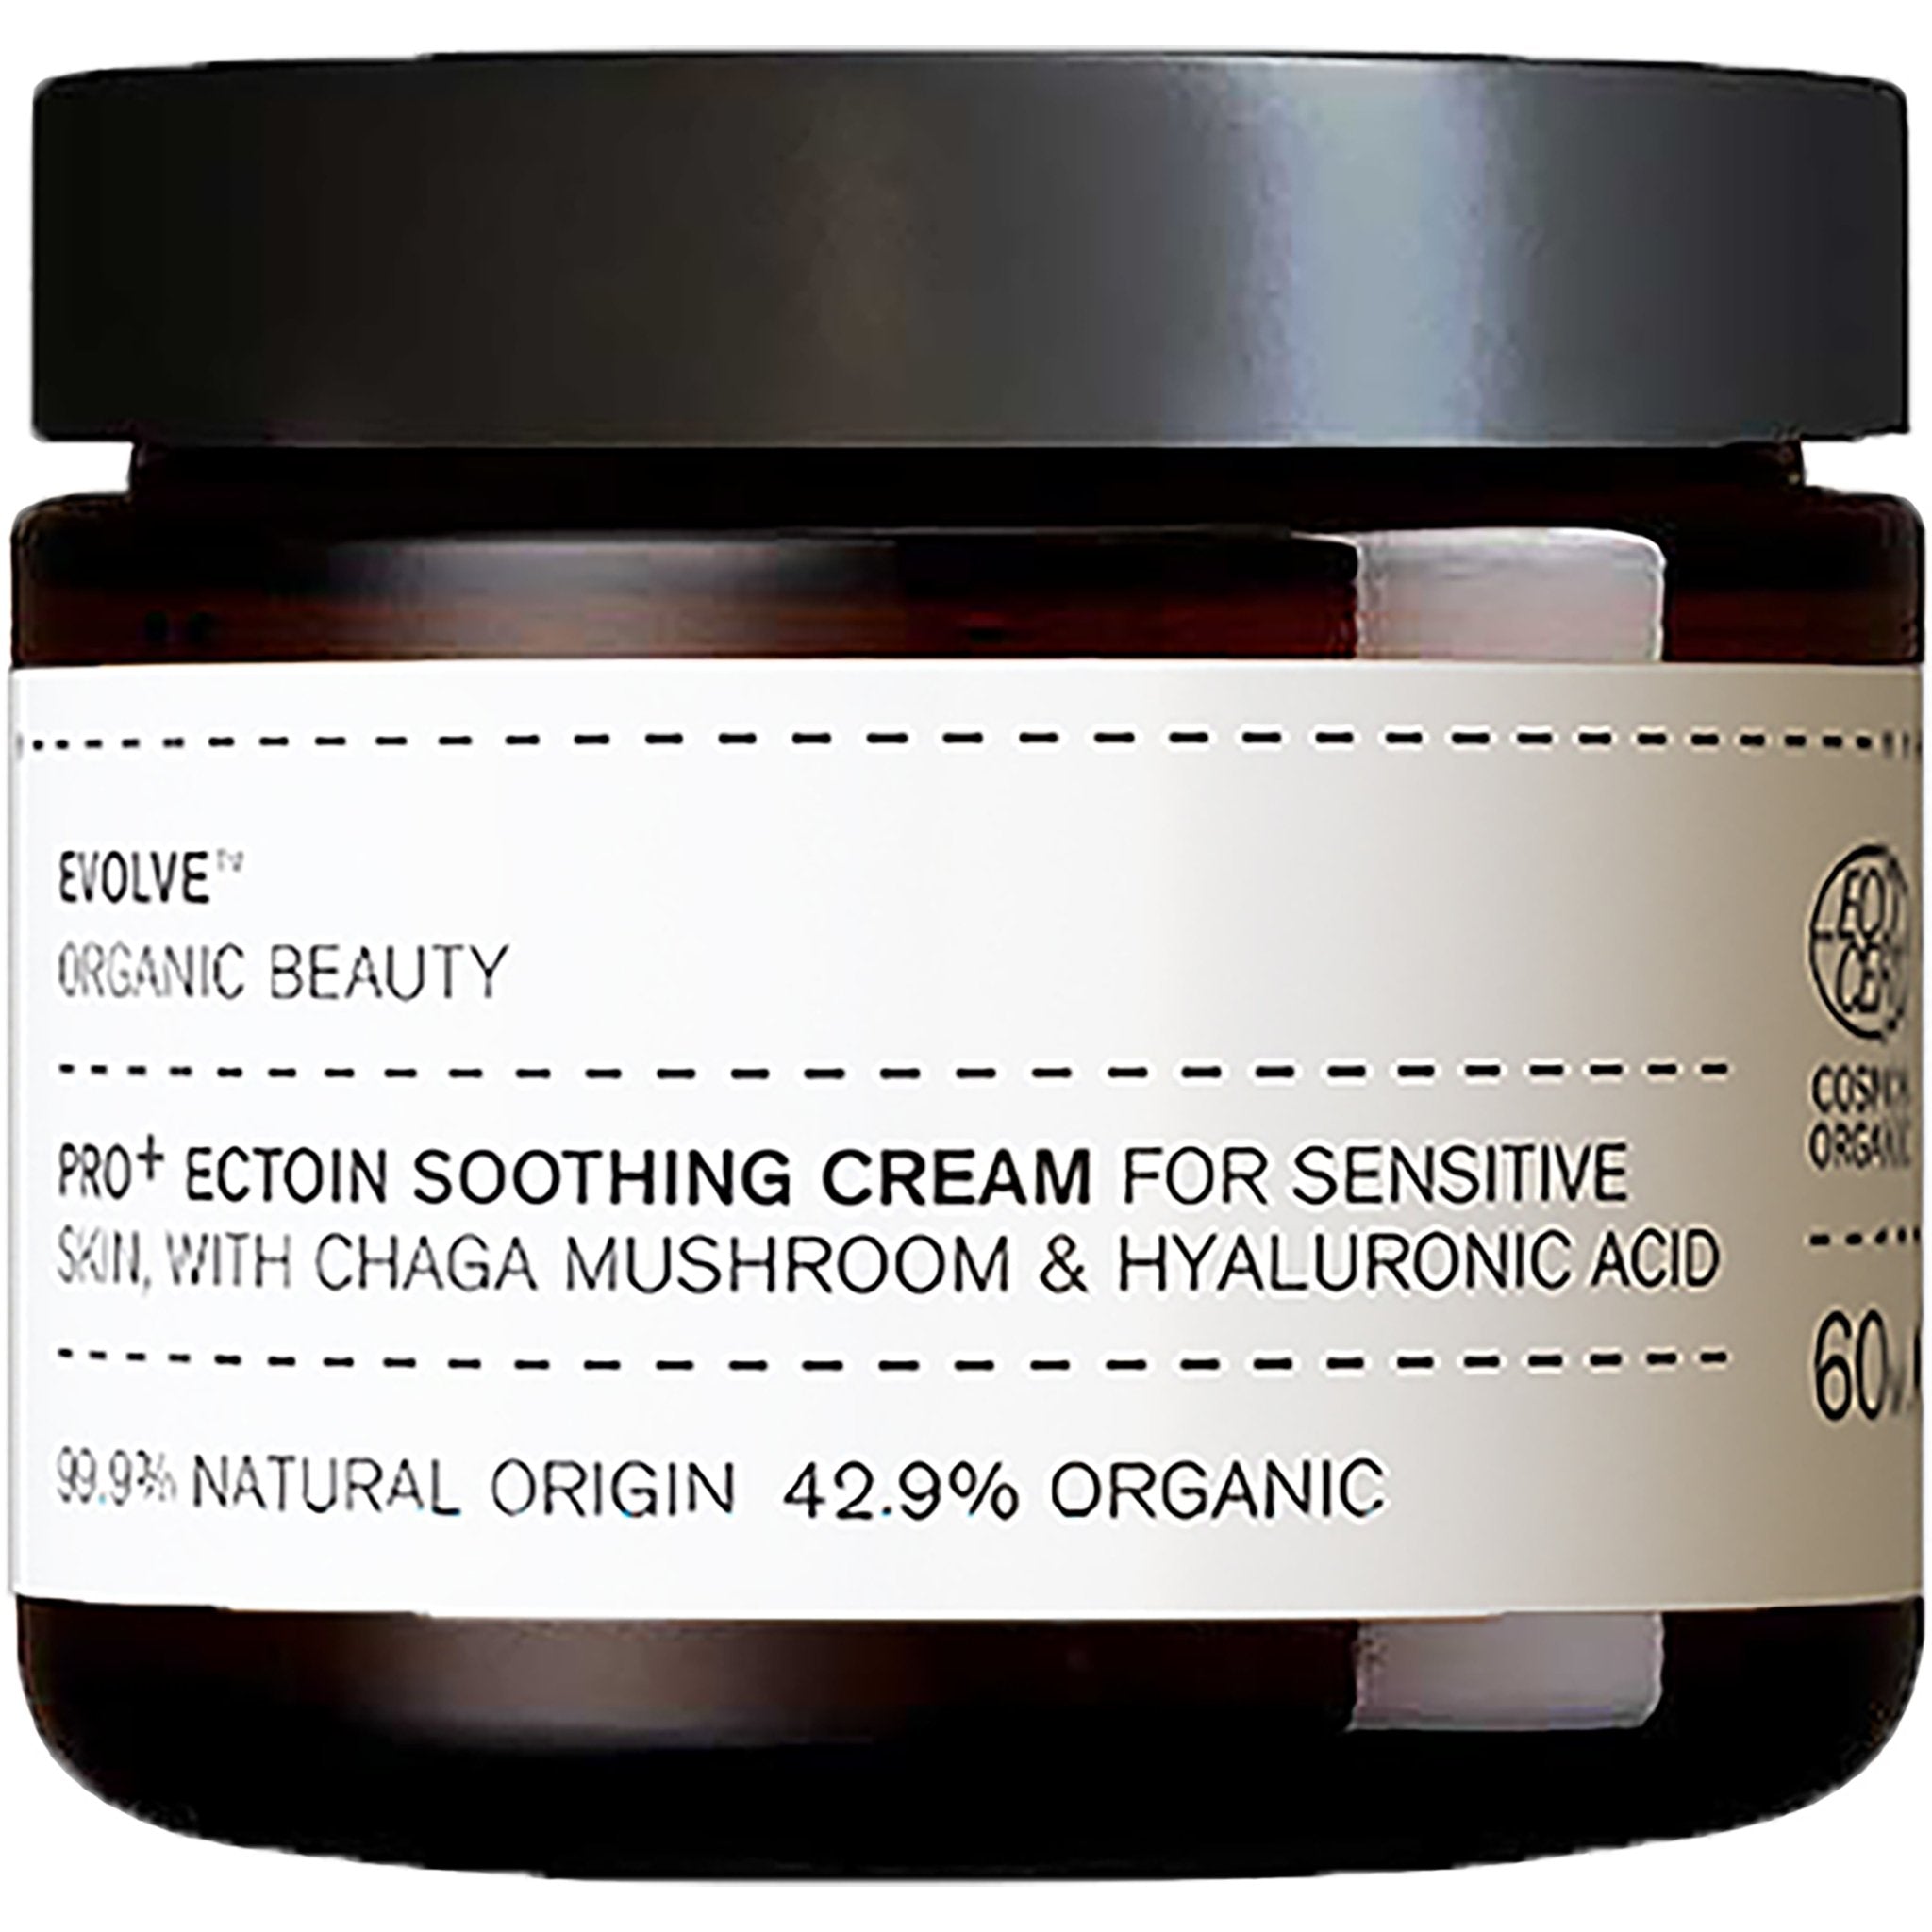 Pro+ Ecton Soothing Cream